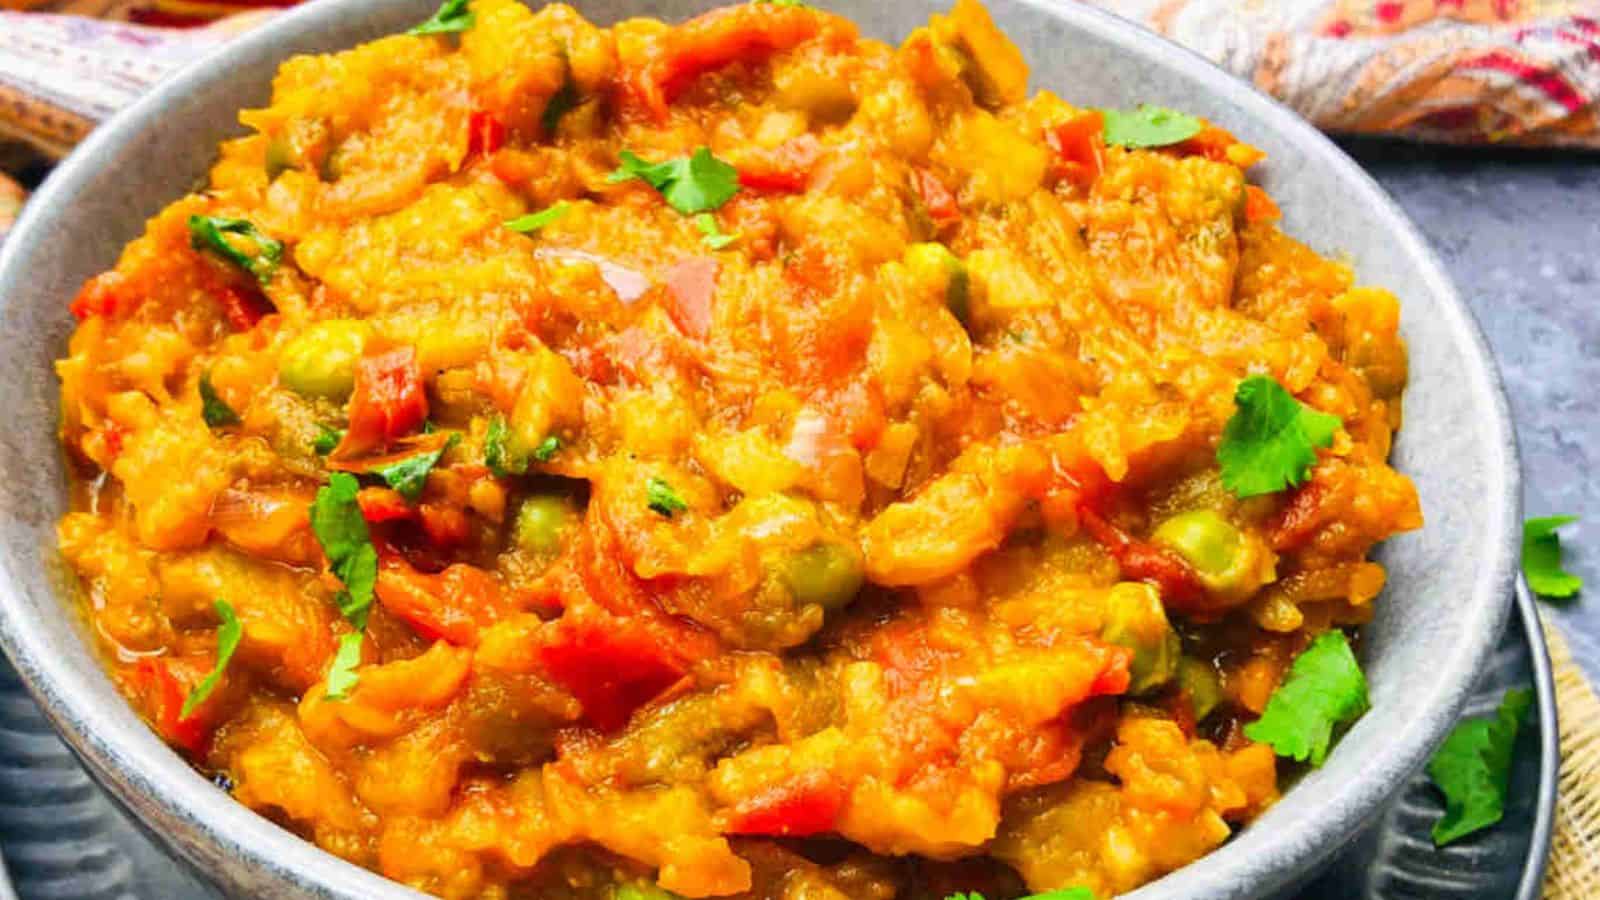 A bowl of baingan bharta, an indian dish made of mashed eggplant mixed with spices, tomatoes, and garnished with cilantro.